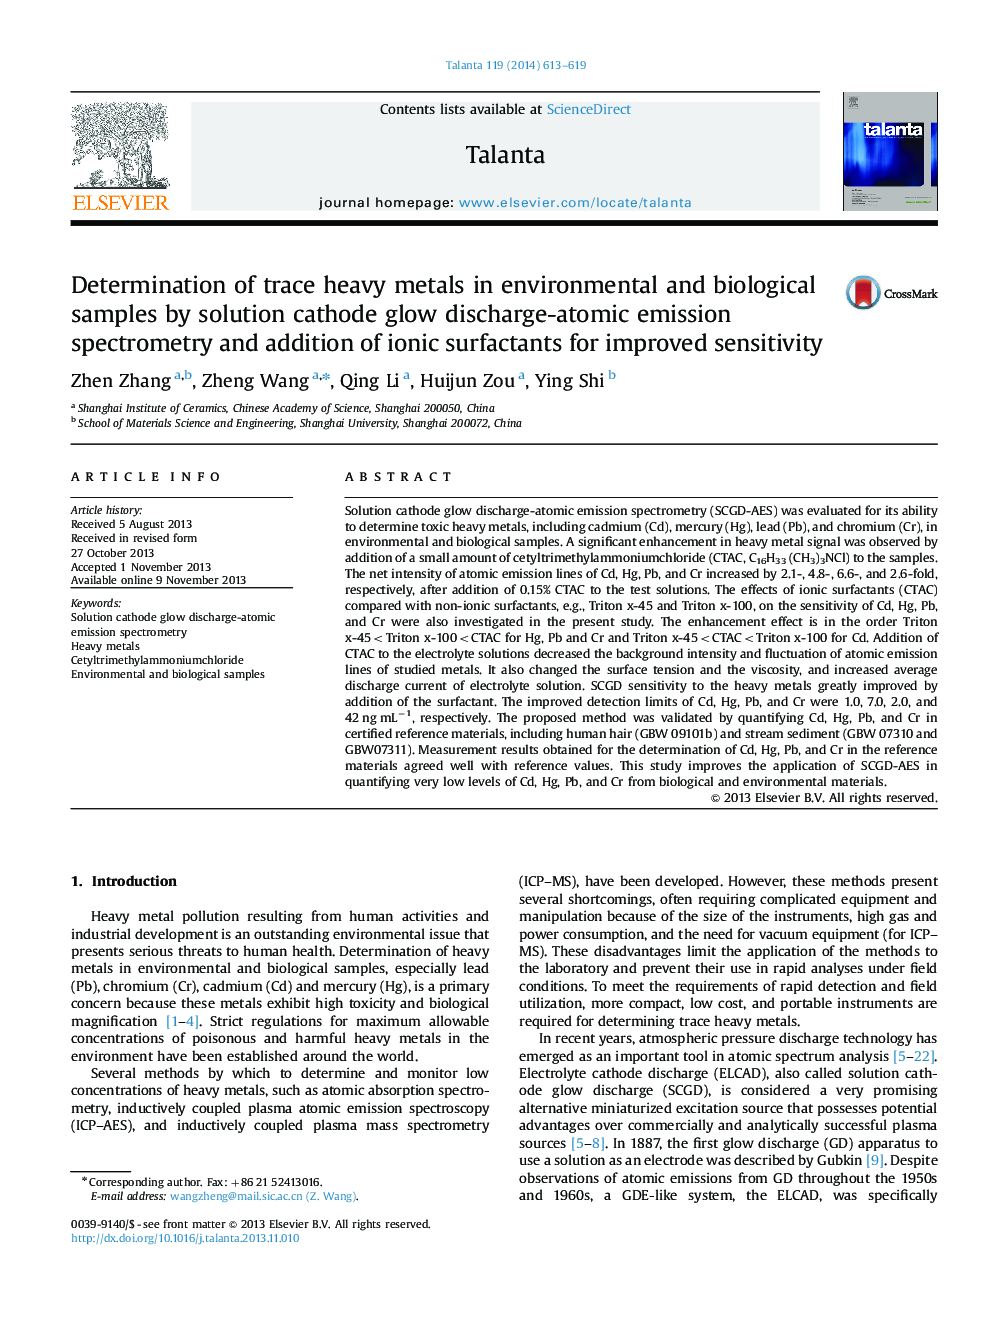 Determination of trace heavy metals in environmental and biological samples by solution cathode glow discharge-atomic emission spectrometry and addition of ionic surfactants for improved sensitivity